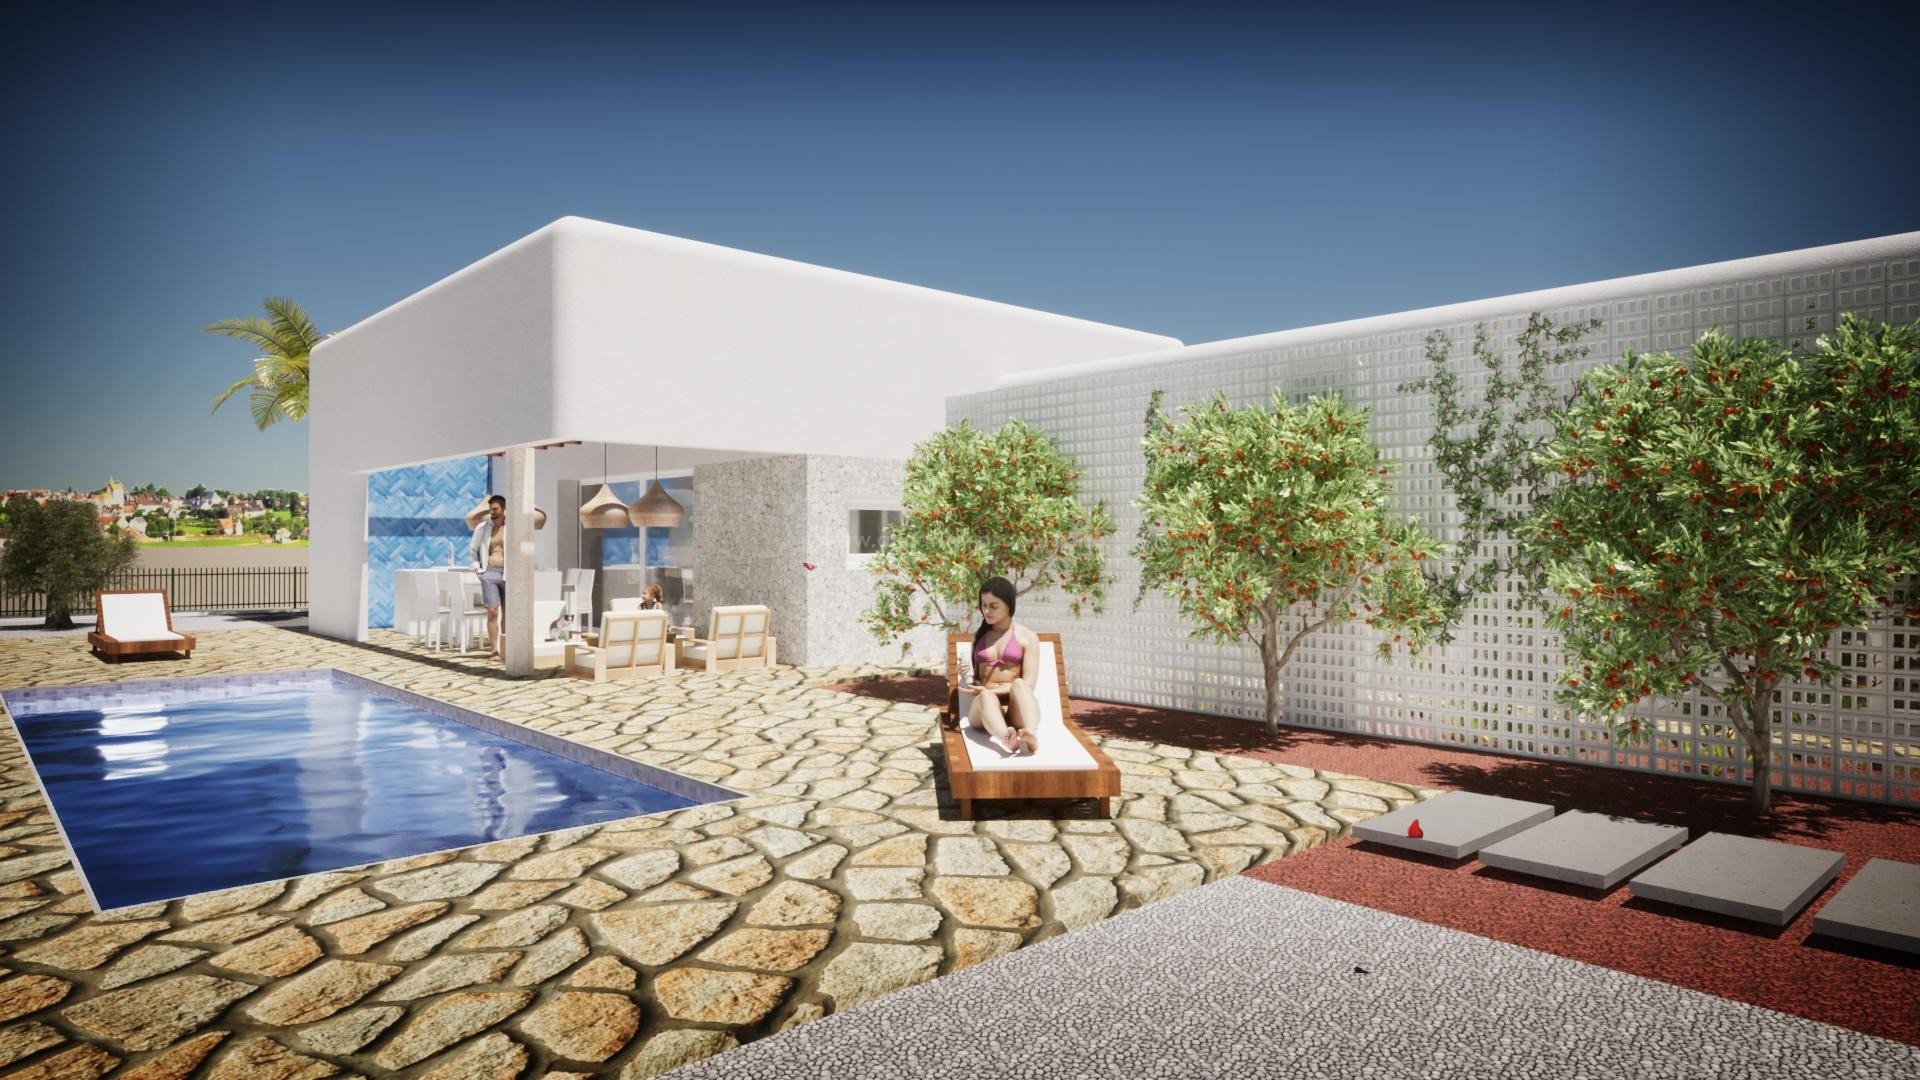 Alfaz del Pi with new Ibiza style villas/houses, 3 bedrooms, 2 bathrooms, large outside pool area. The master bedroom has a walk-in closet and a private bathroom